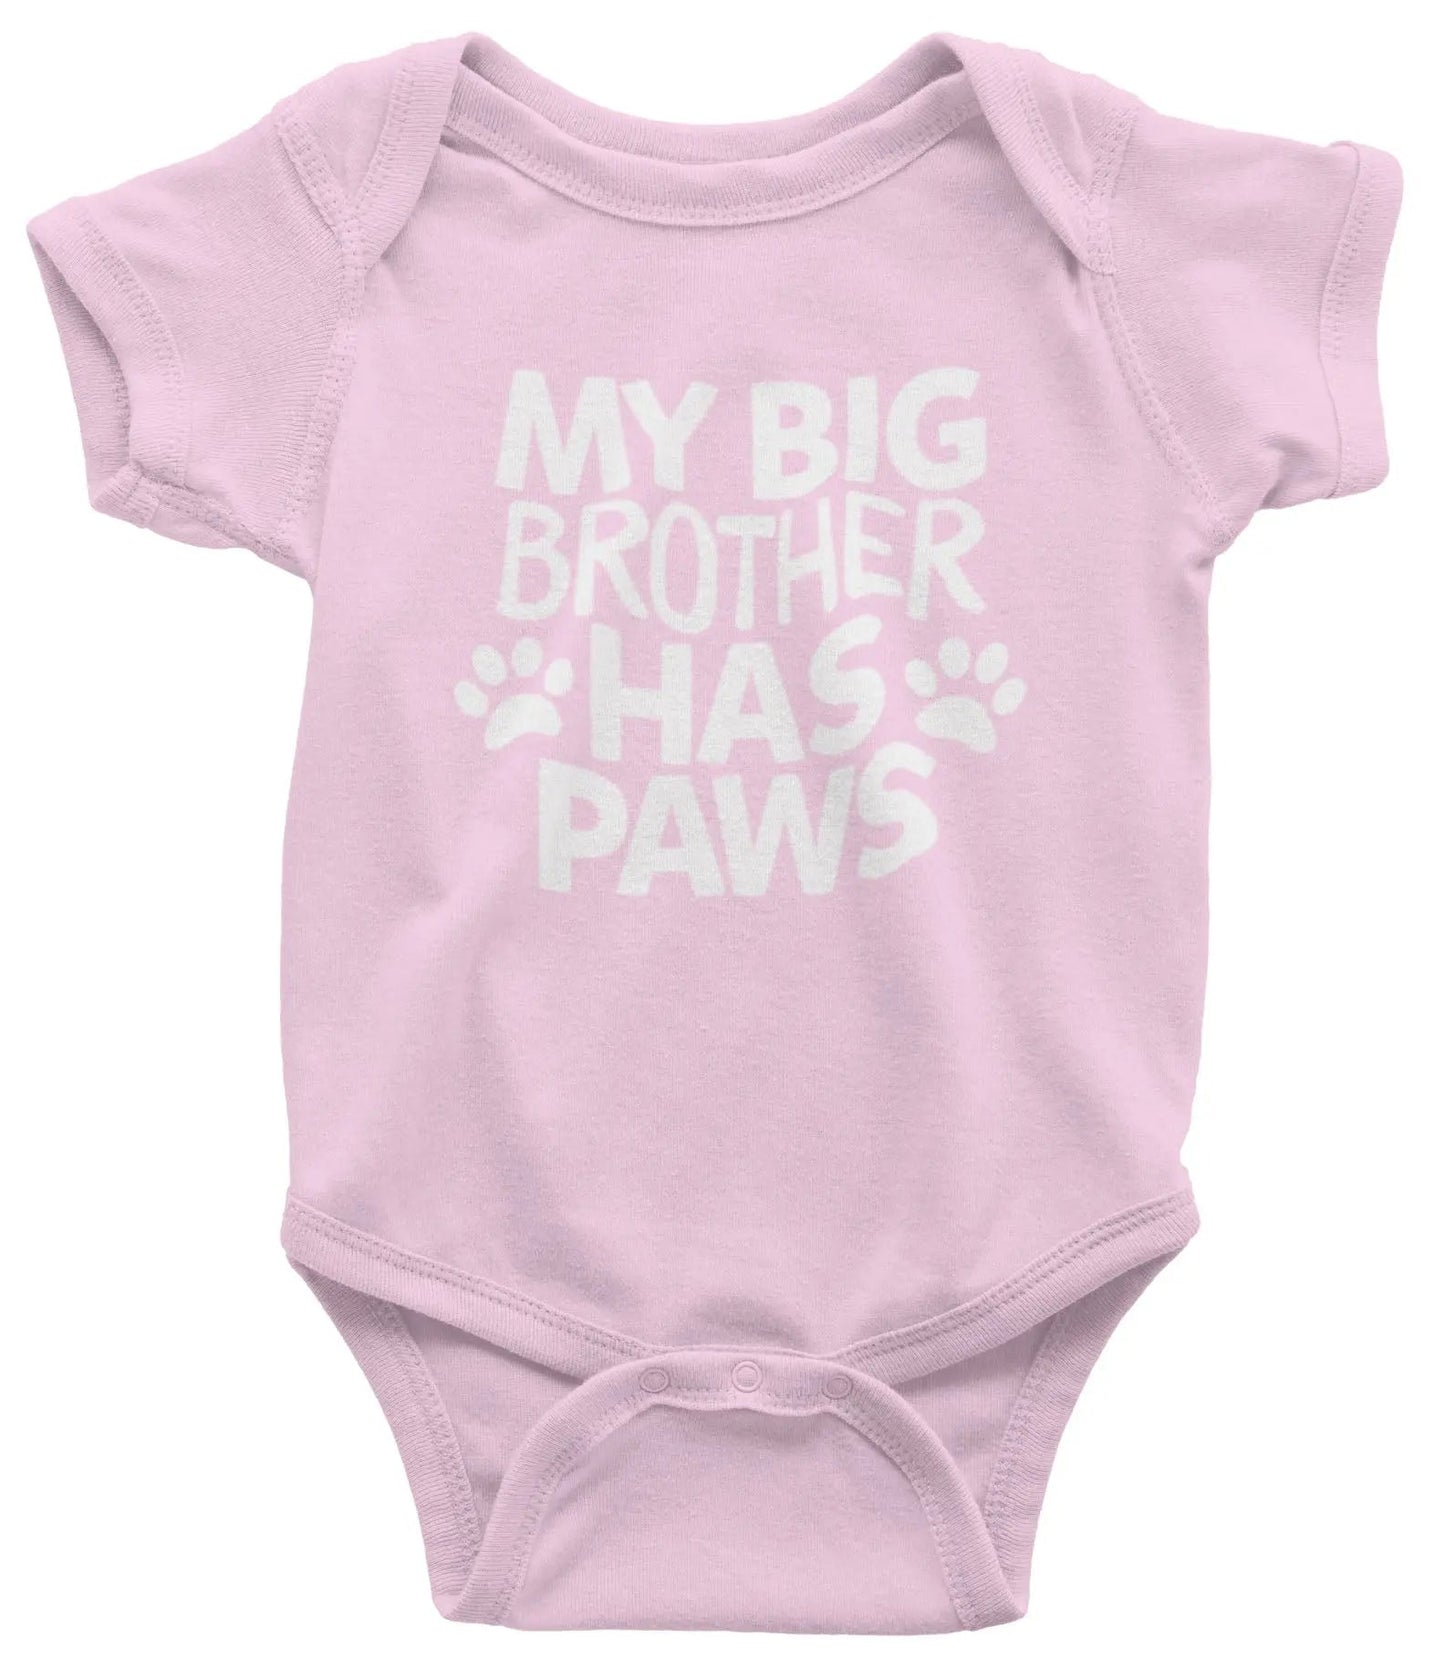 6TN Baby Funny Baby Body Suit My Big Brother Has Paws Cute Design